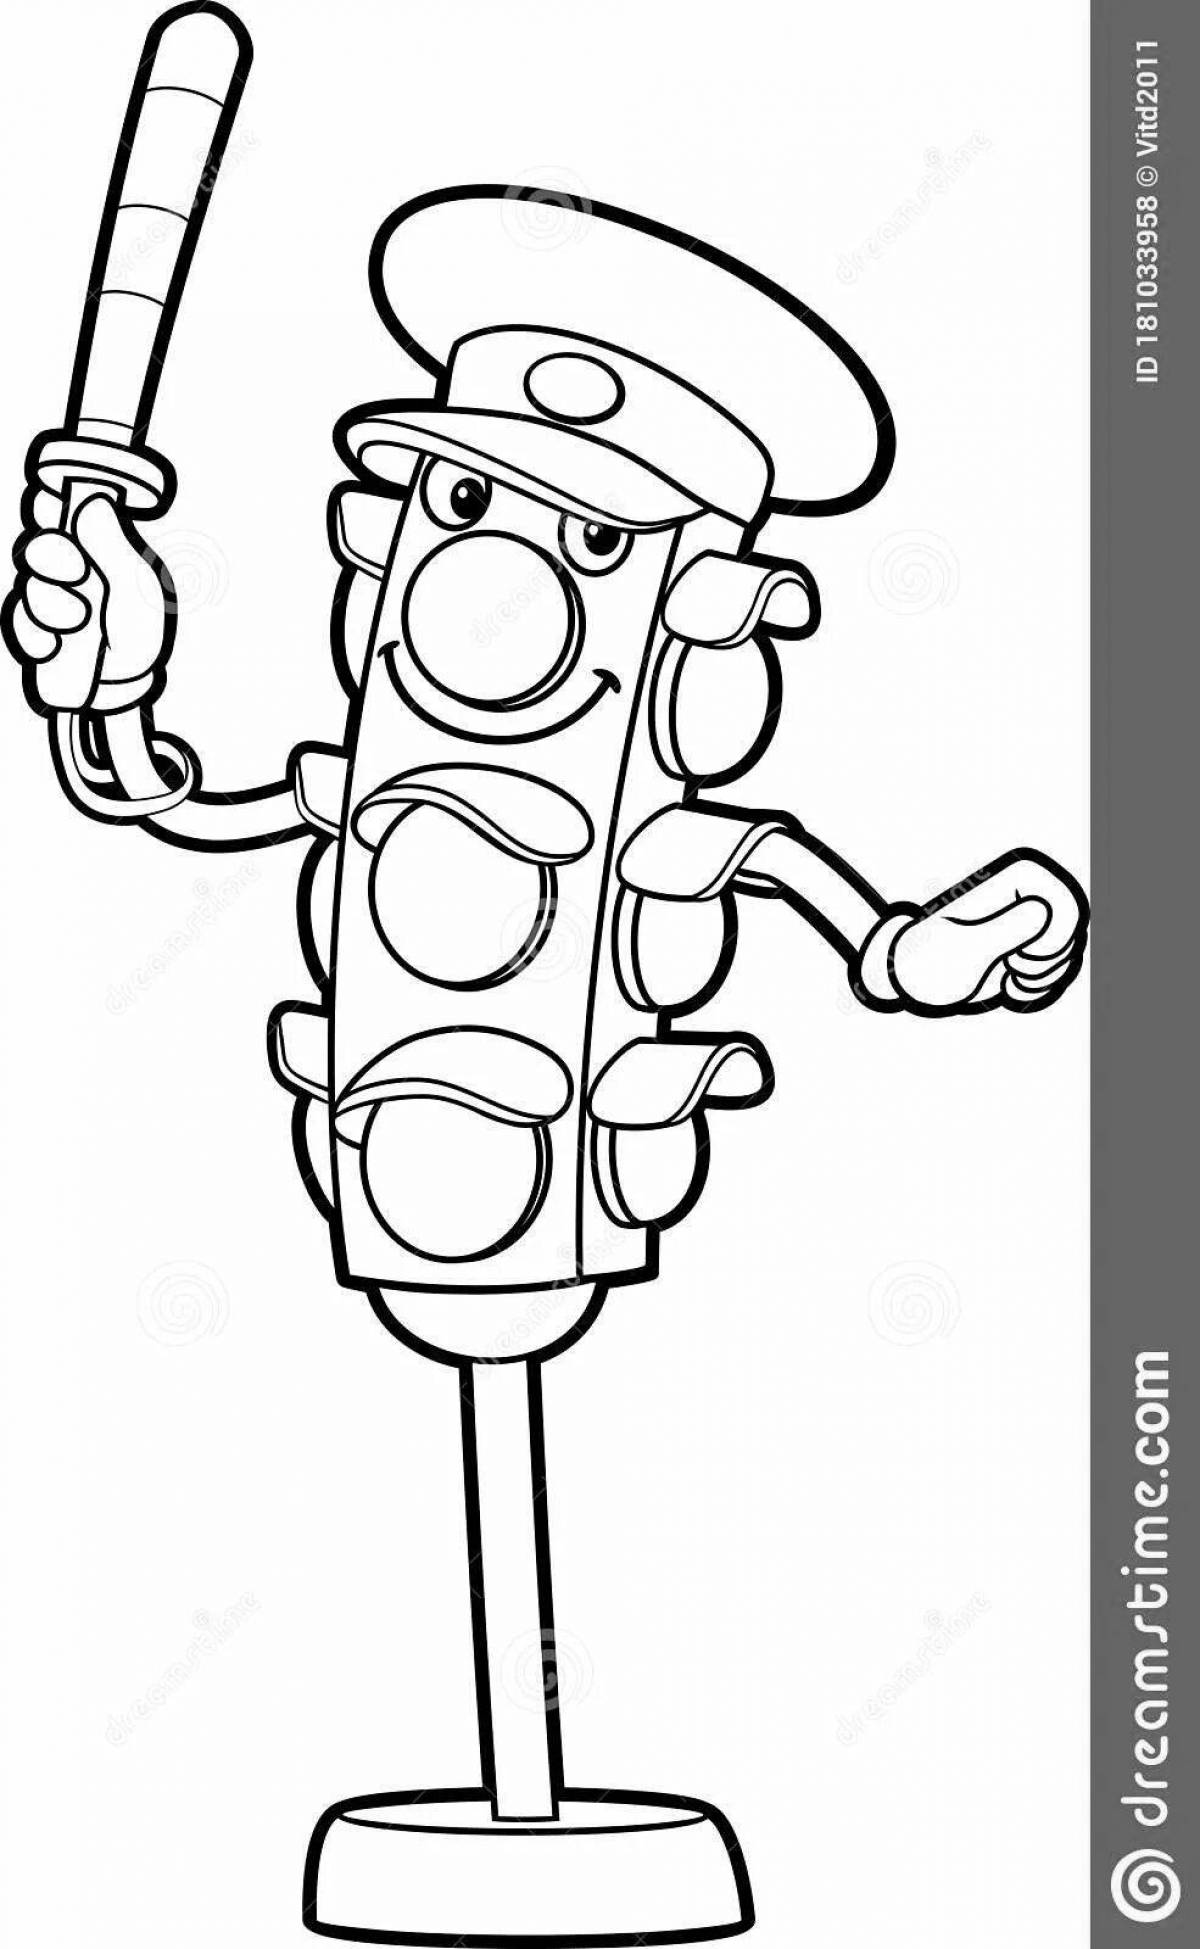 Amazing junior traffic controller coloring page